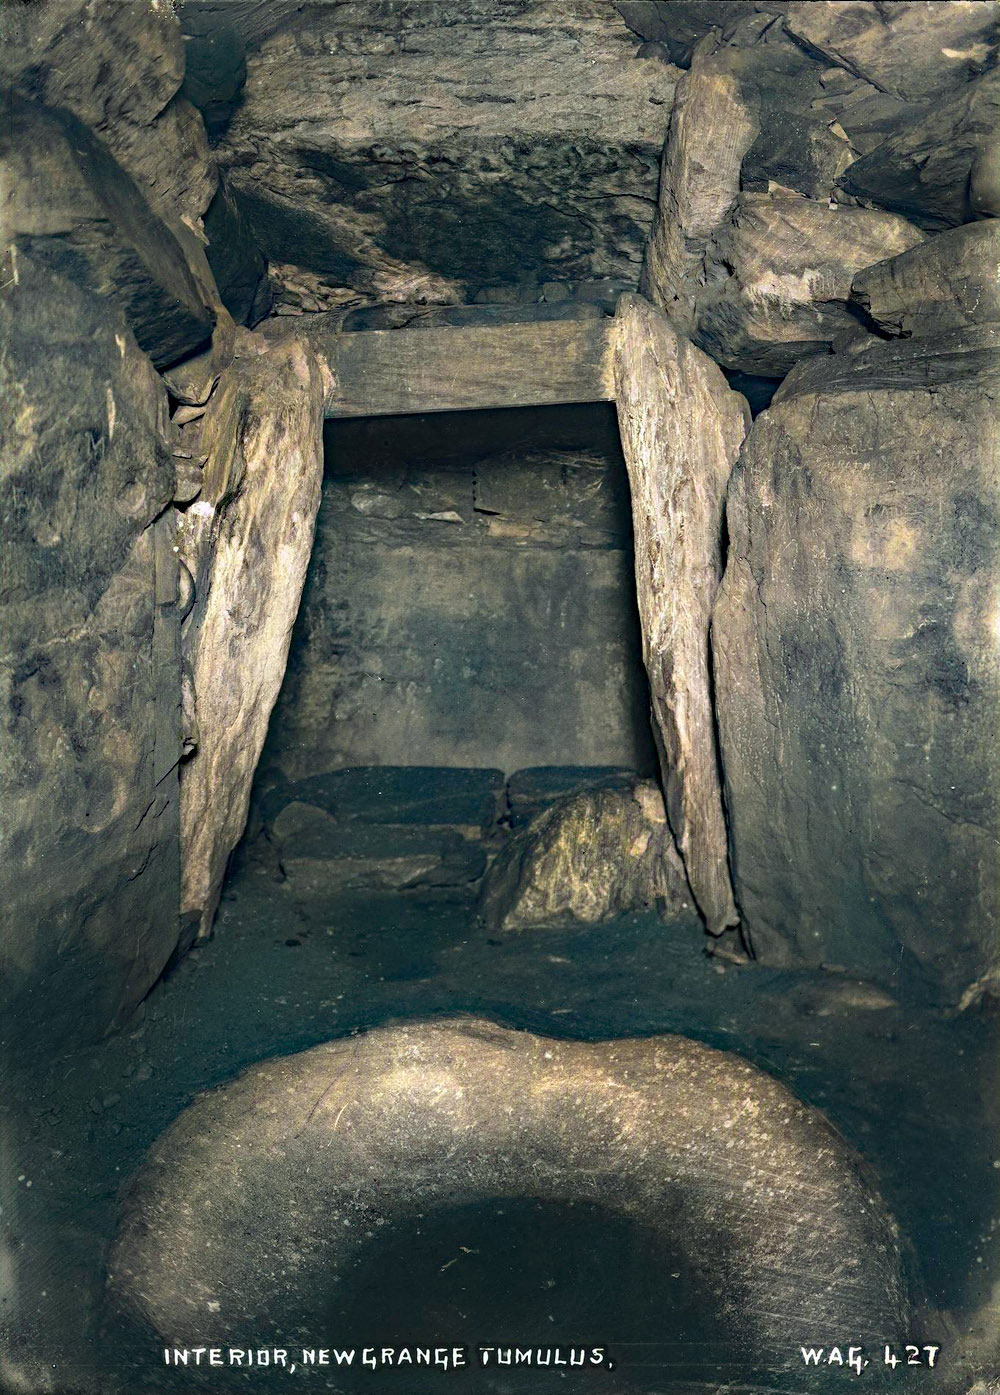 The chamber of Newgrange by W. A. Green.